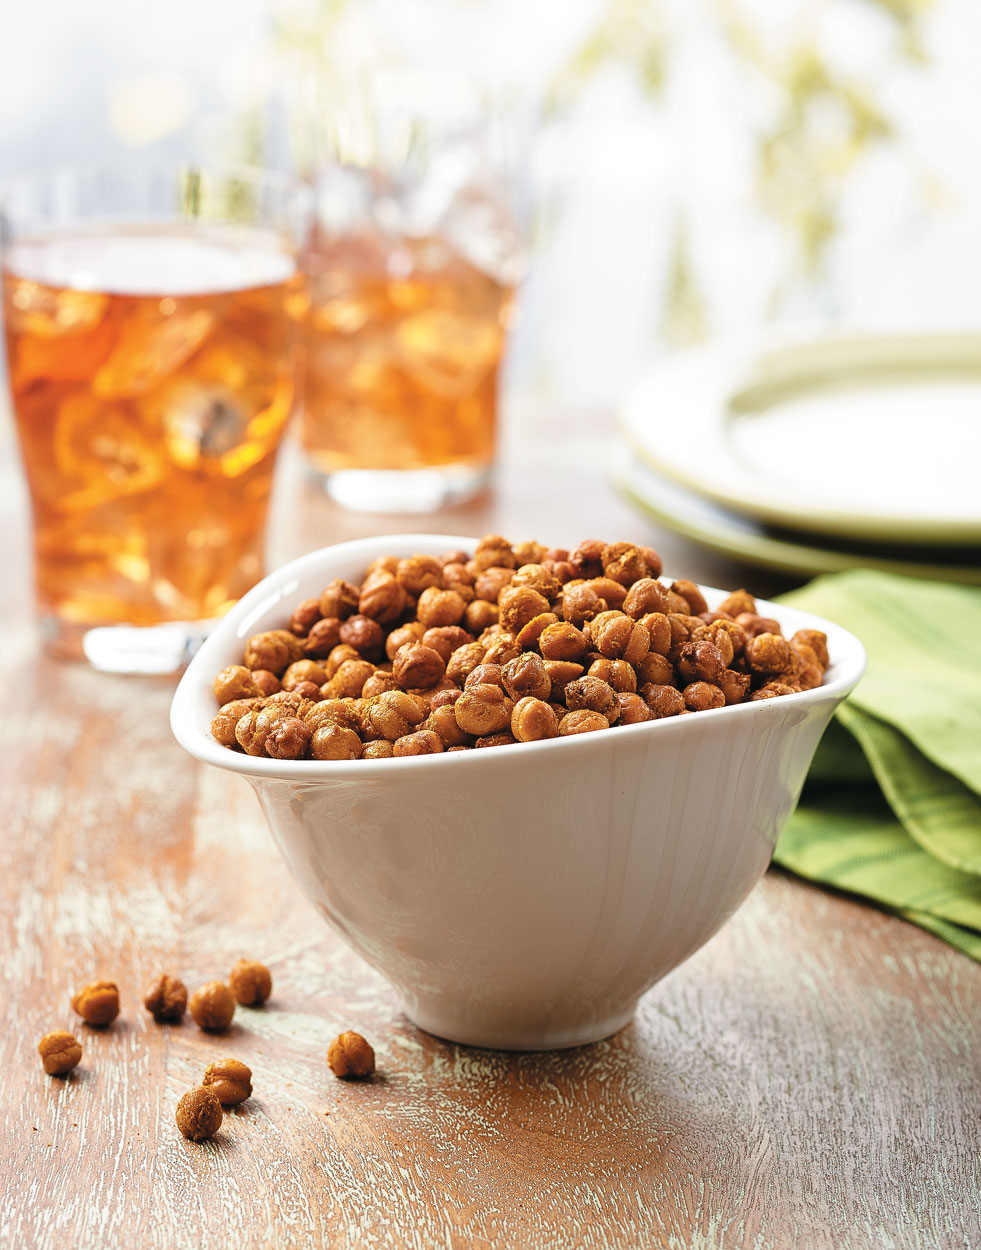 Curry-Roasted Chickpeas Recipe